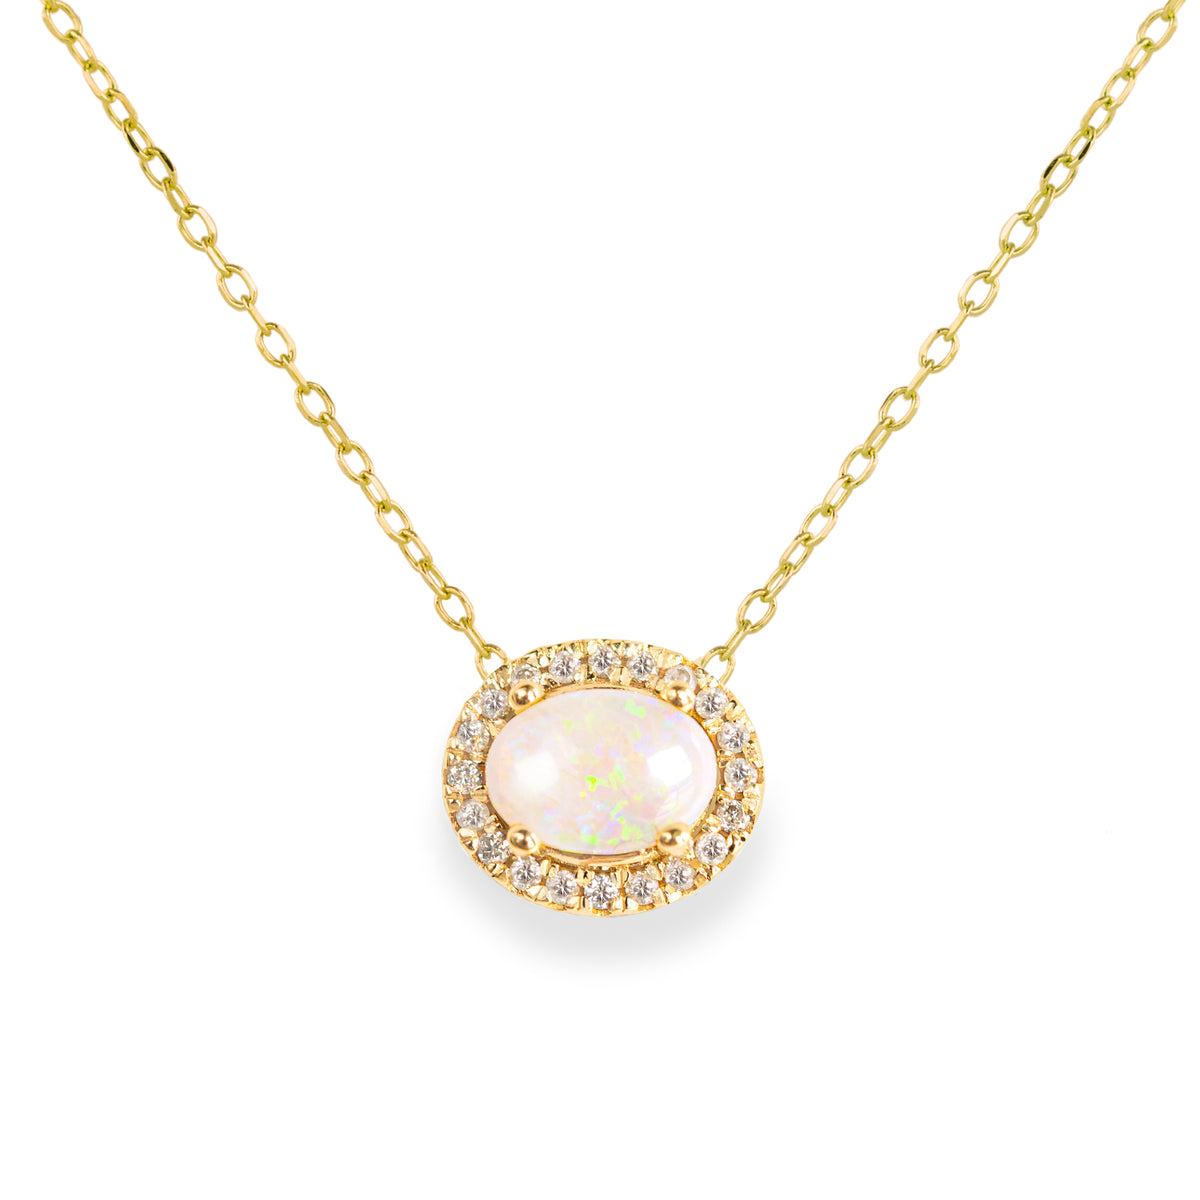 Jamie Park Jewelry -Opal Diamond Halo Necklace This necklace is the epitome of luxury, featuring an oval Australian opal surrounded by a radiant halo of natural diamonds. A symbol of hope and purity, it makes the perfect gift for any special occasion.